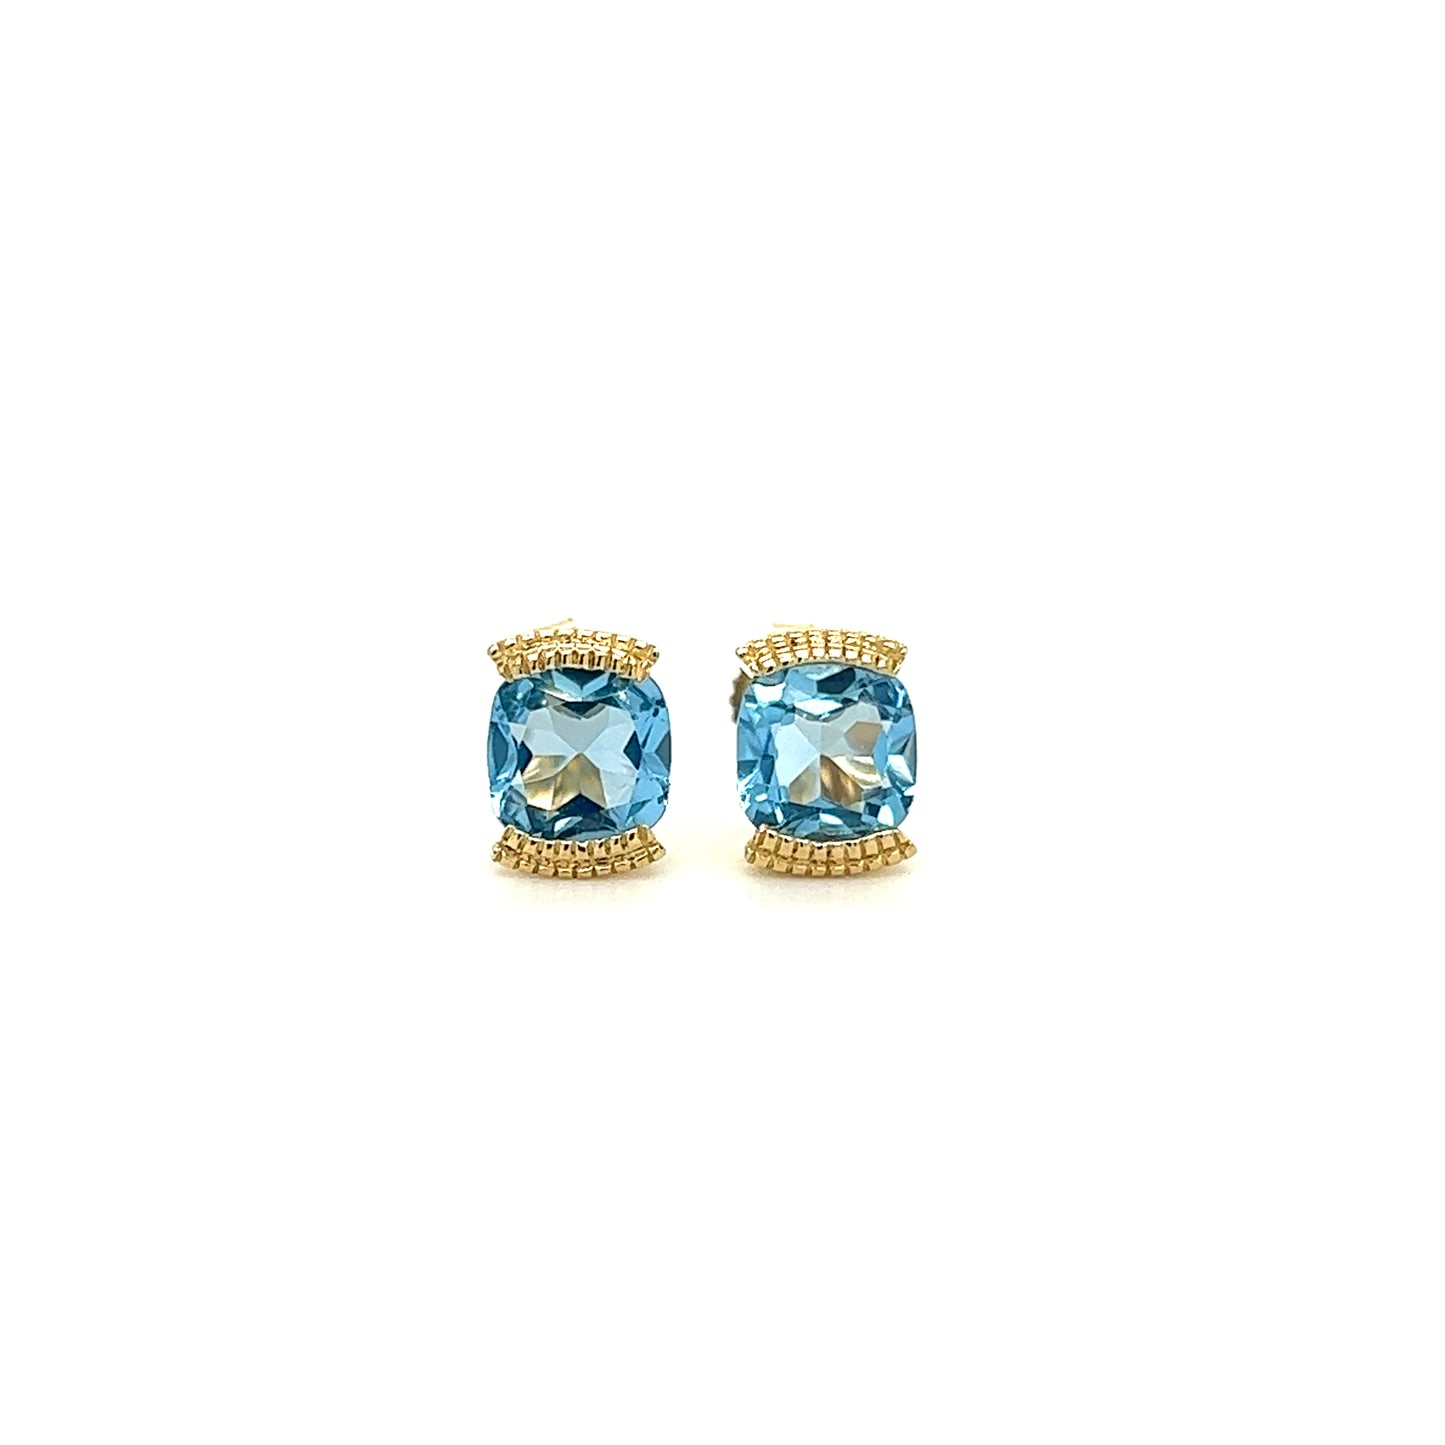 Cushion Blue Topaz Stud Earrings with 1.78ctw of Swiss Blue Topaz in 14K Yellow Gold Front View